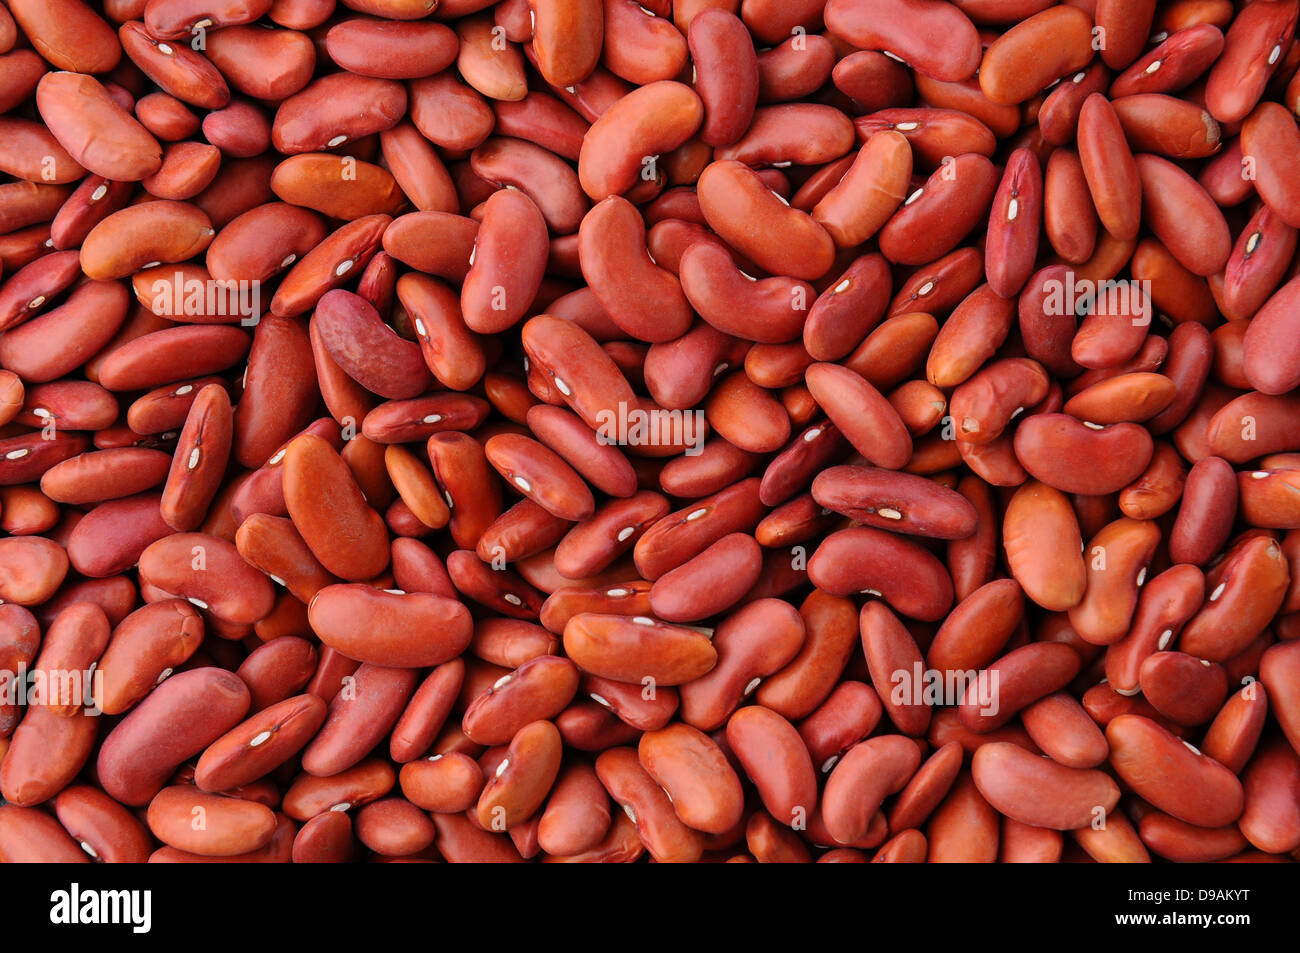 A closeup of a mass of red kidney beans that fills the frame. Stock Photo